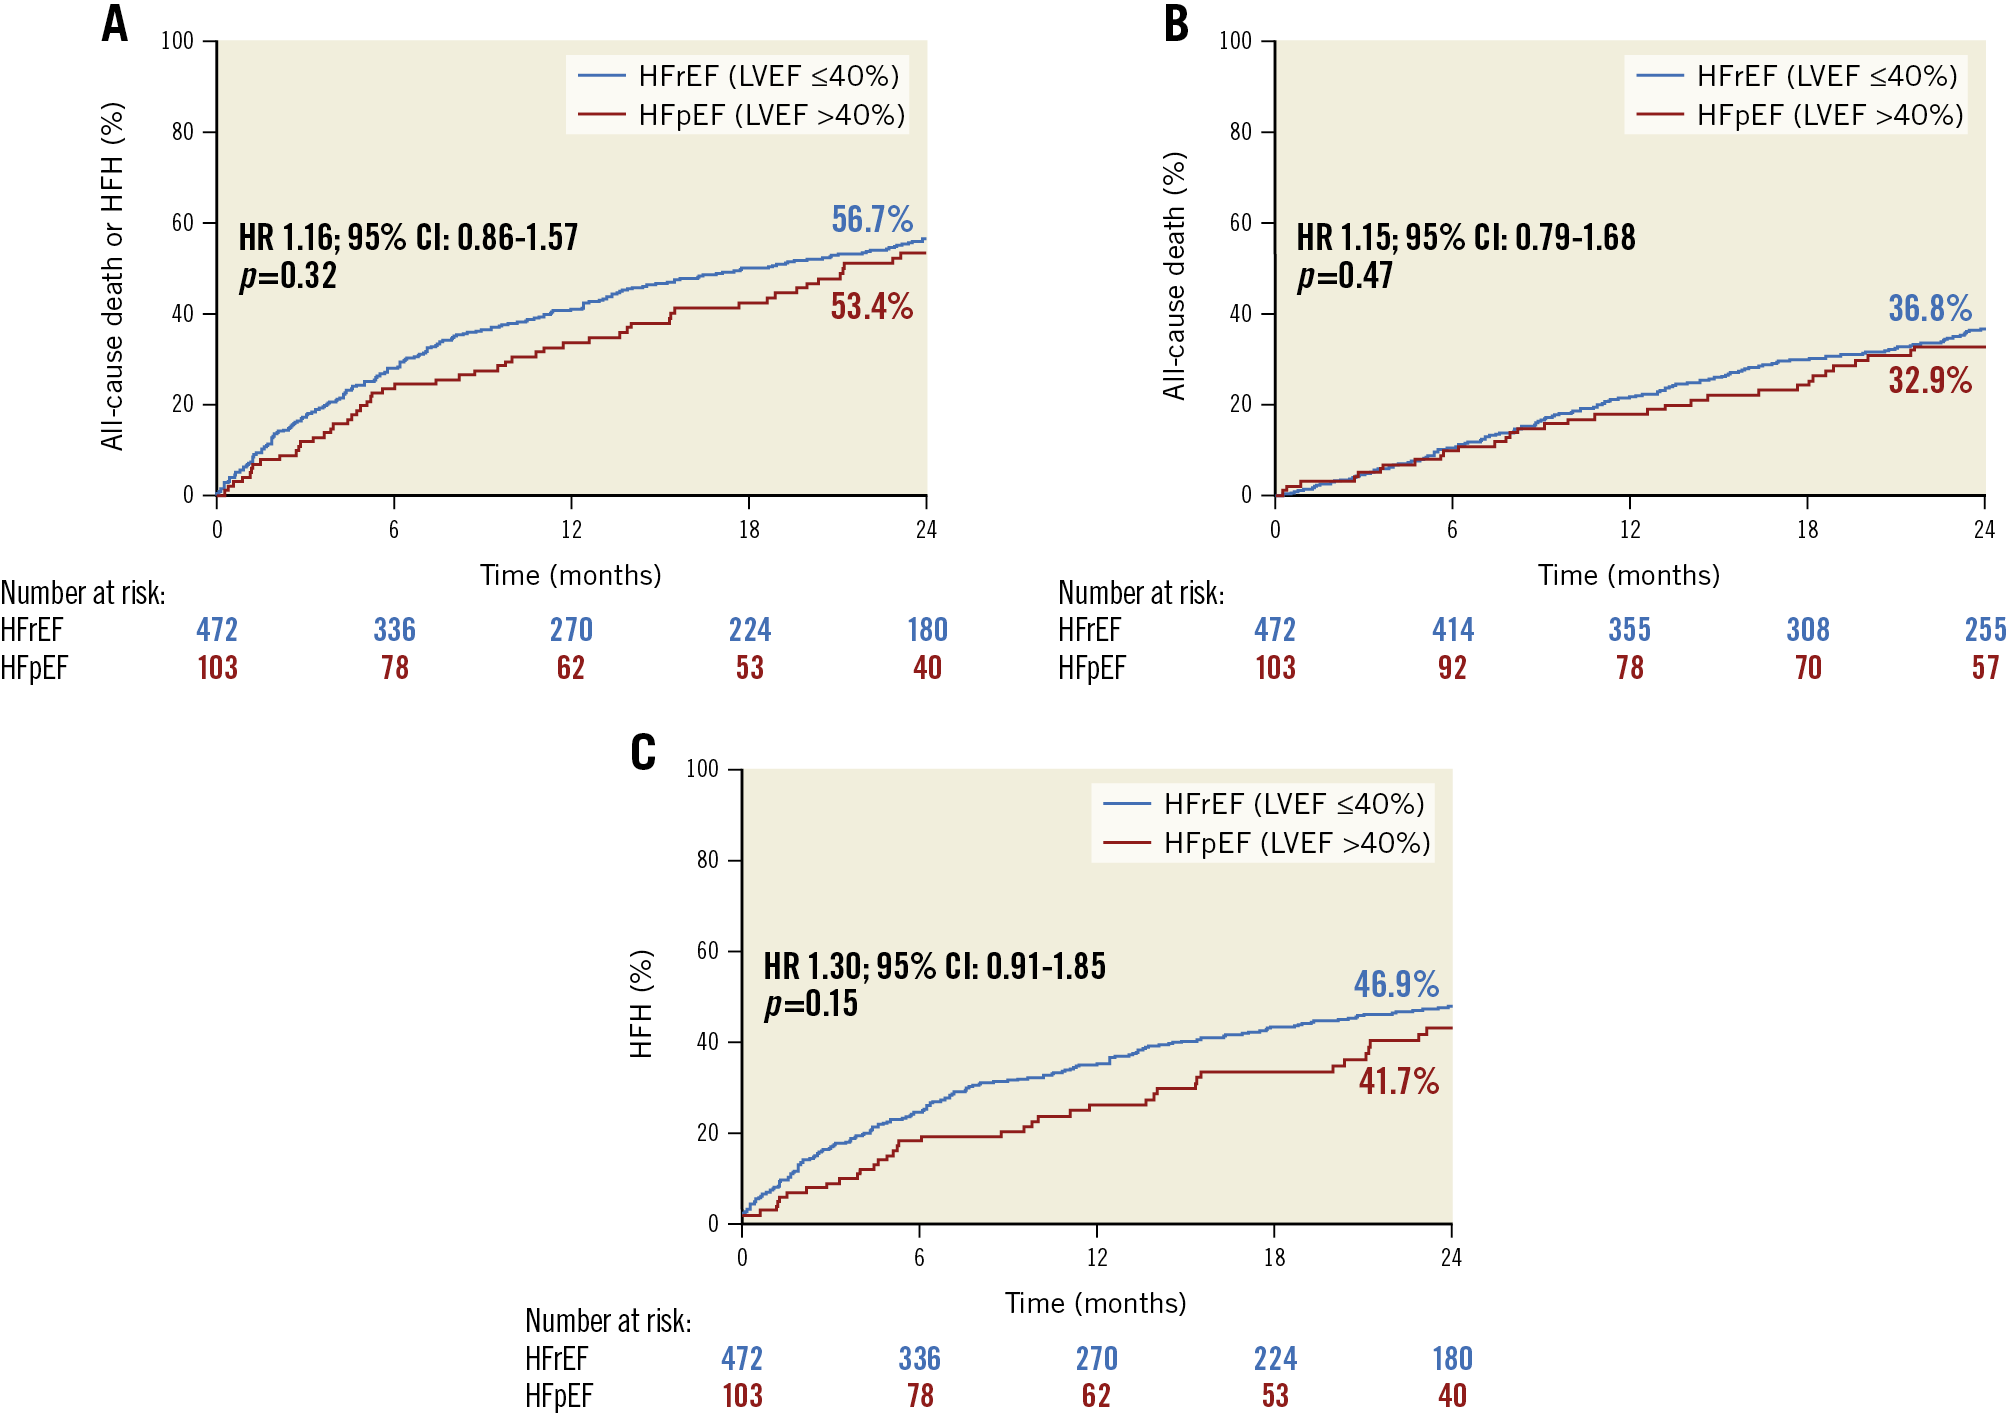 Figure 2. Kaplan-Meier time-to-first-event curves in patients with HFrEF versus HFpEF. A) Death or heart failure hospitalisation (HFH). B) Death. C) HFH. CI: confidence interval; HFpEF: heart failure with preserved ejection fraction; HFrEF: heart failure with reduced ejection fraction; HR: hazard ratio